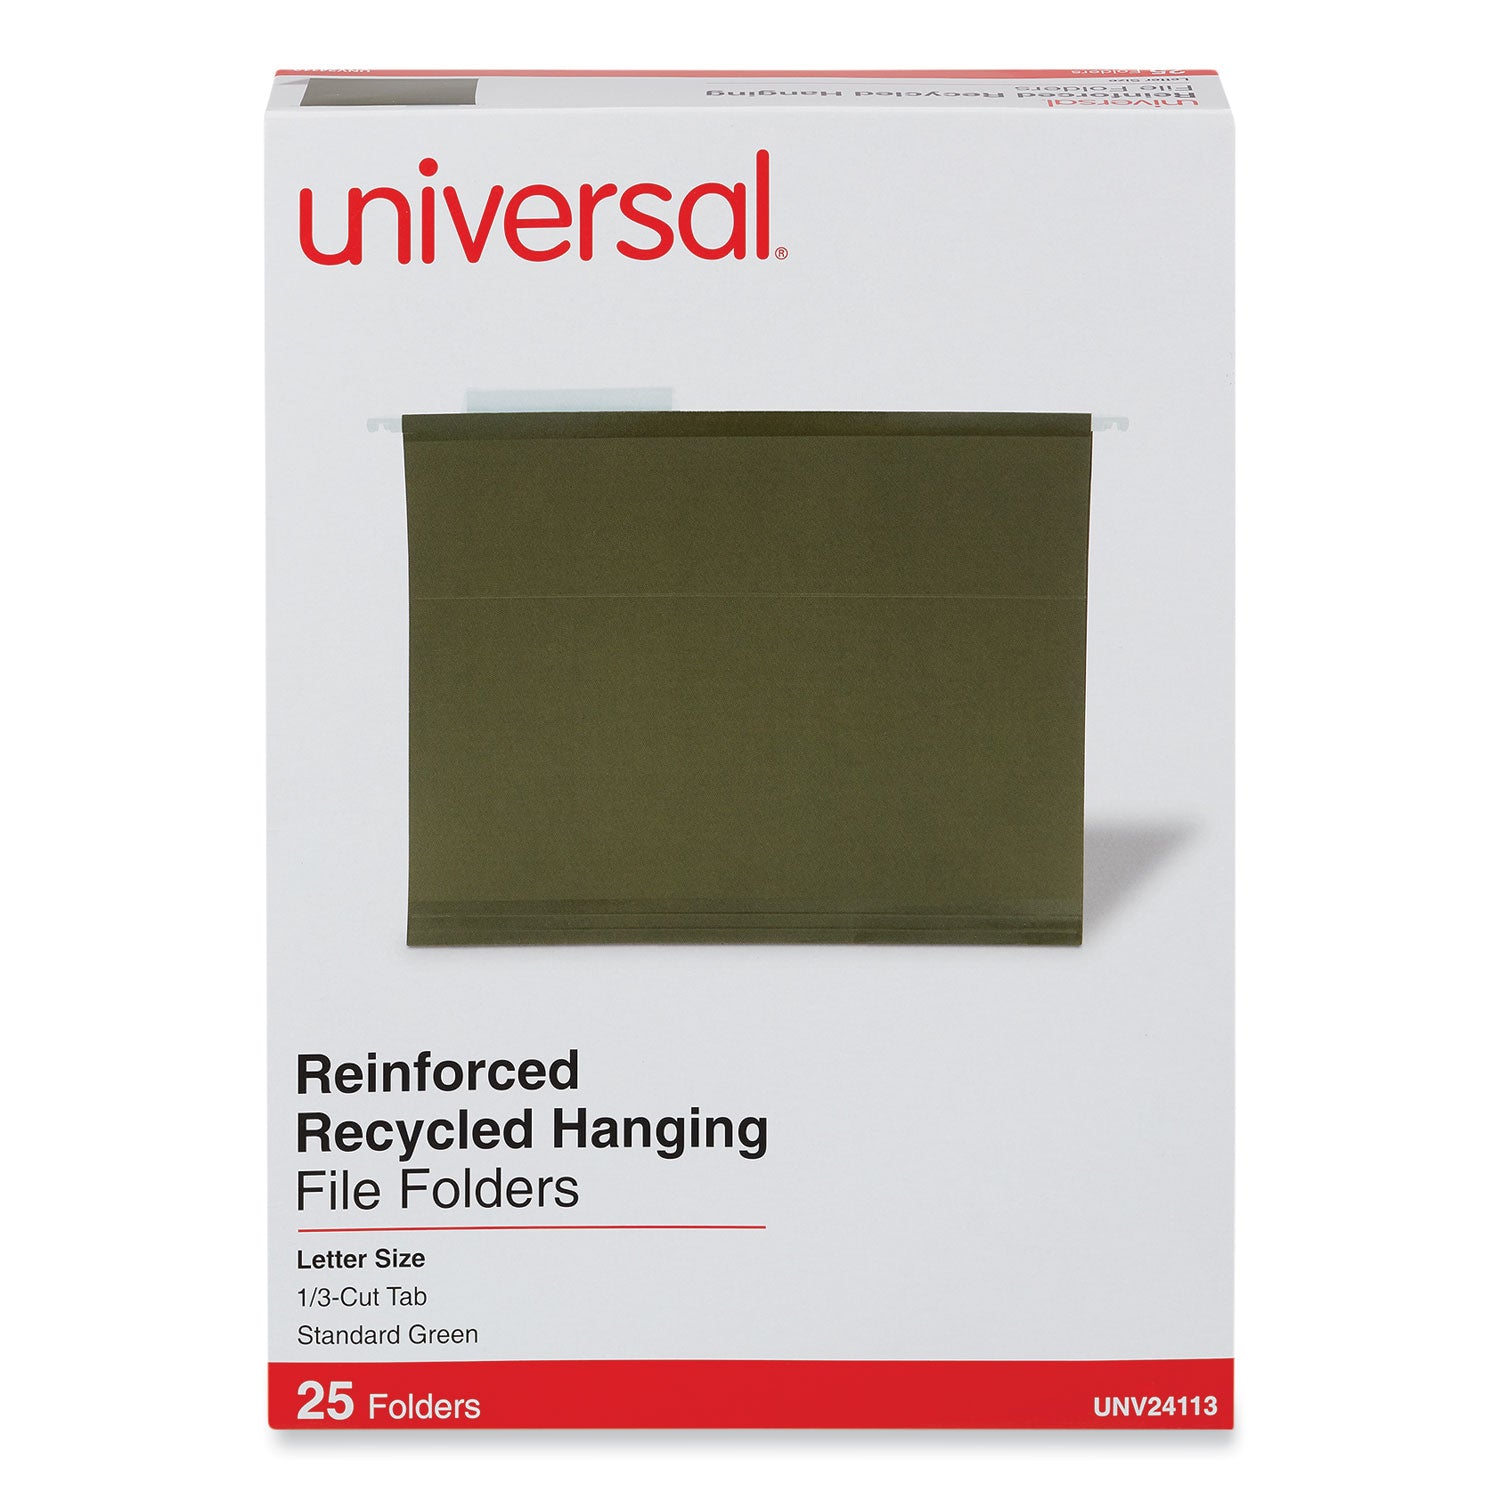 Deluxe Reinforced Recycled Hanging File Folders, Letter Size, 1/3-Cut Tabs, Standard Green, 25/Box - 